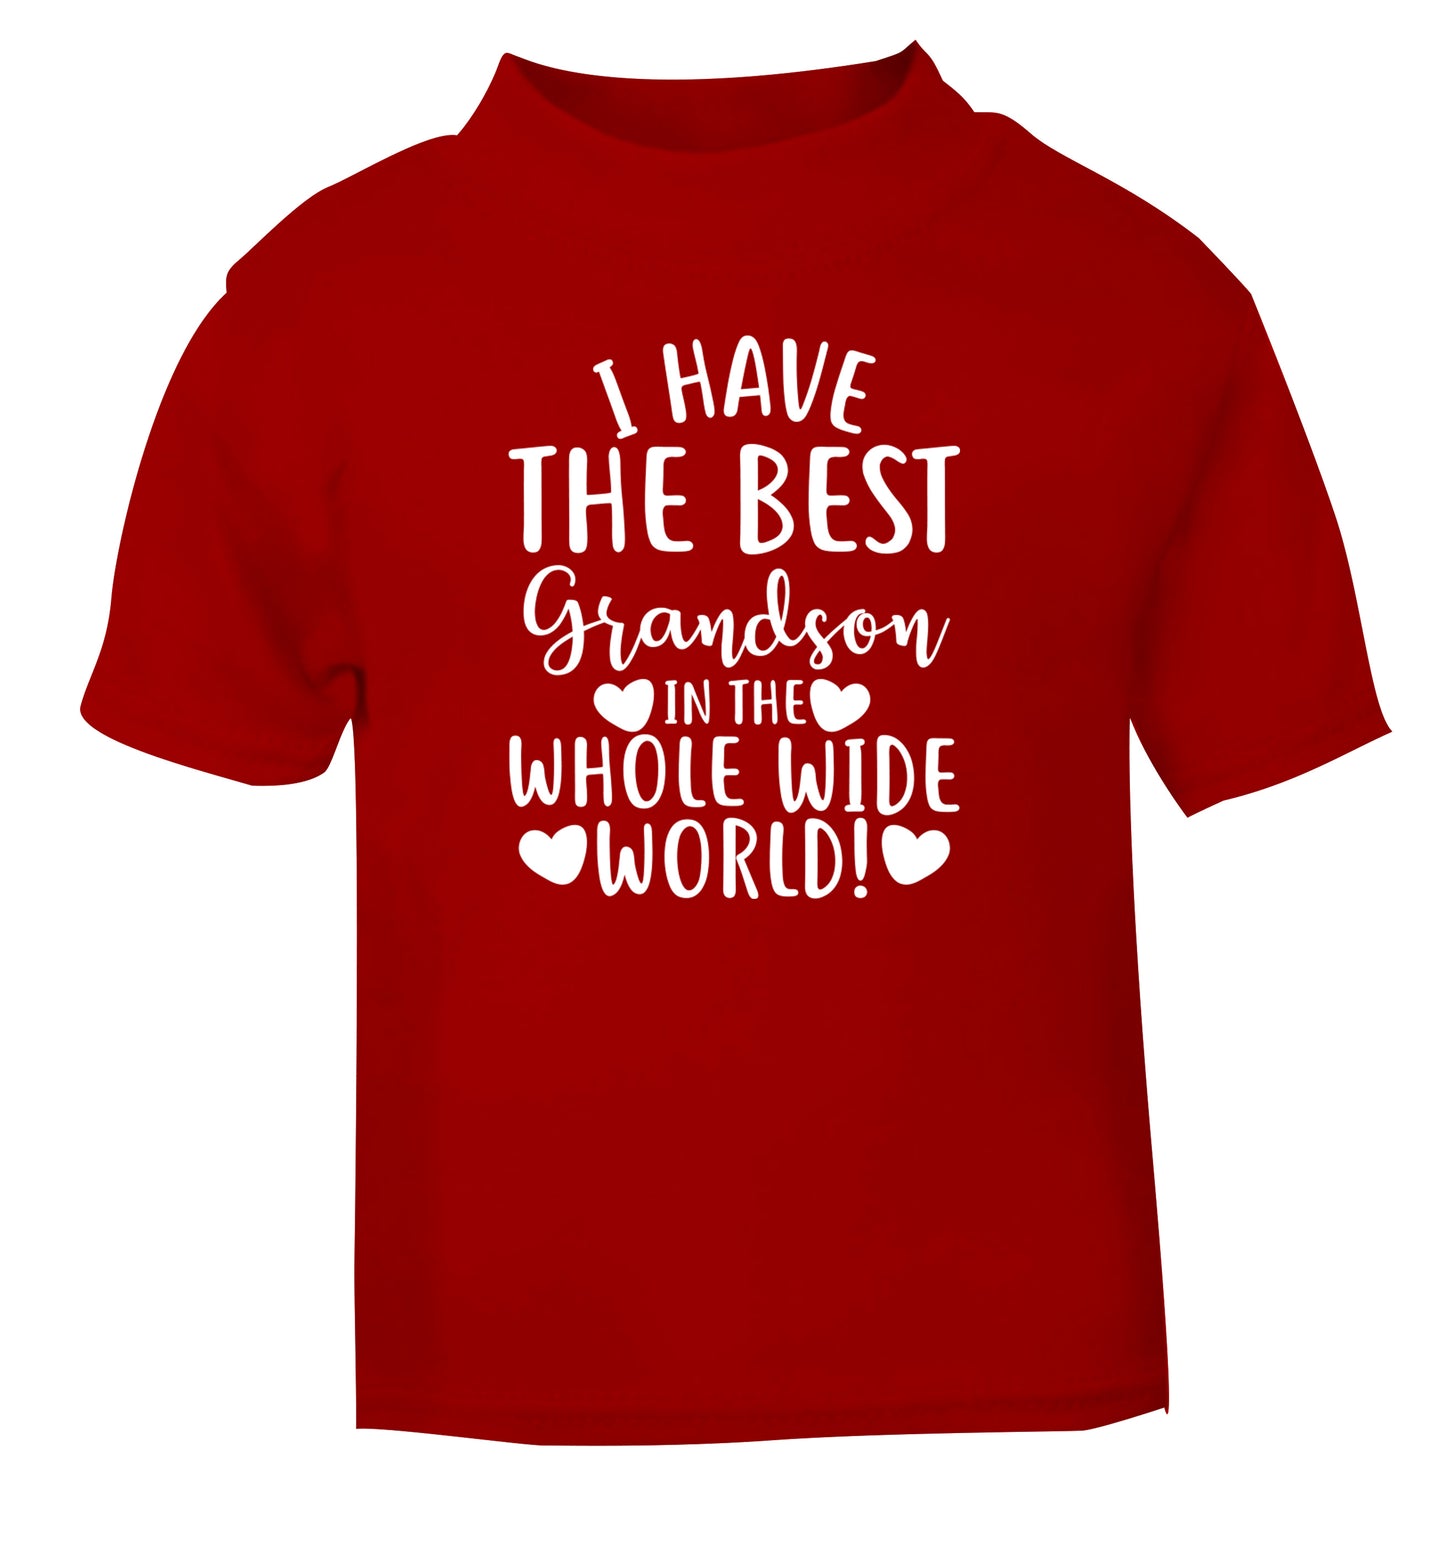 I have the best grandson in the whole wide world! red Baby Toddler Tshirt 2 Years